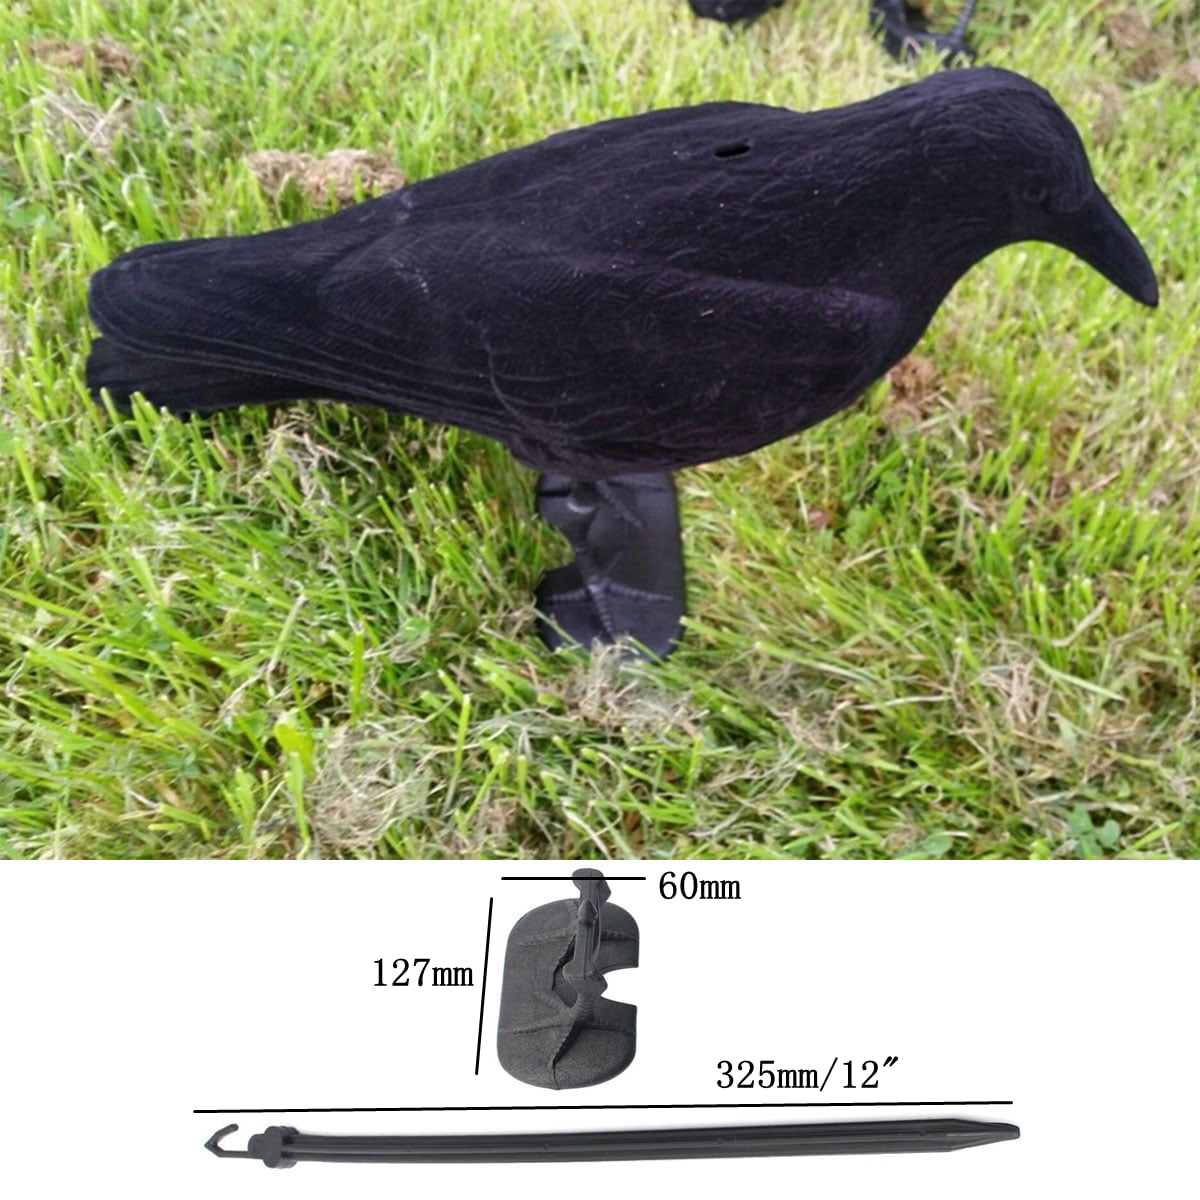 STAKE FEET 6 FLOCKED CROW DECOY FULL BODY WHOLE ROOK RAVEN SHOOTING HUNTING 